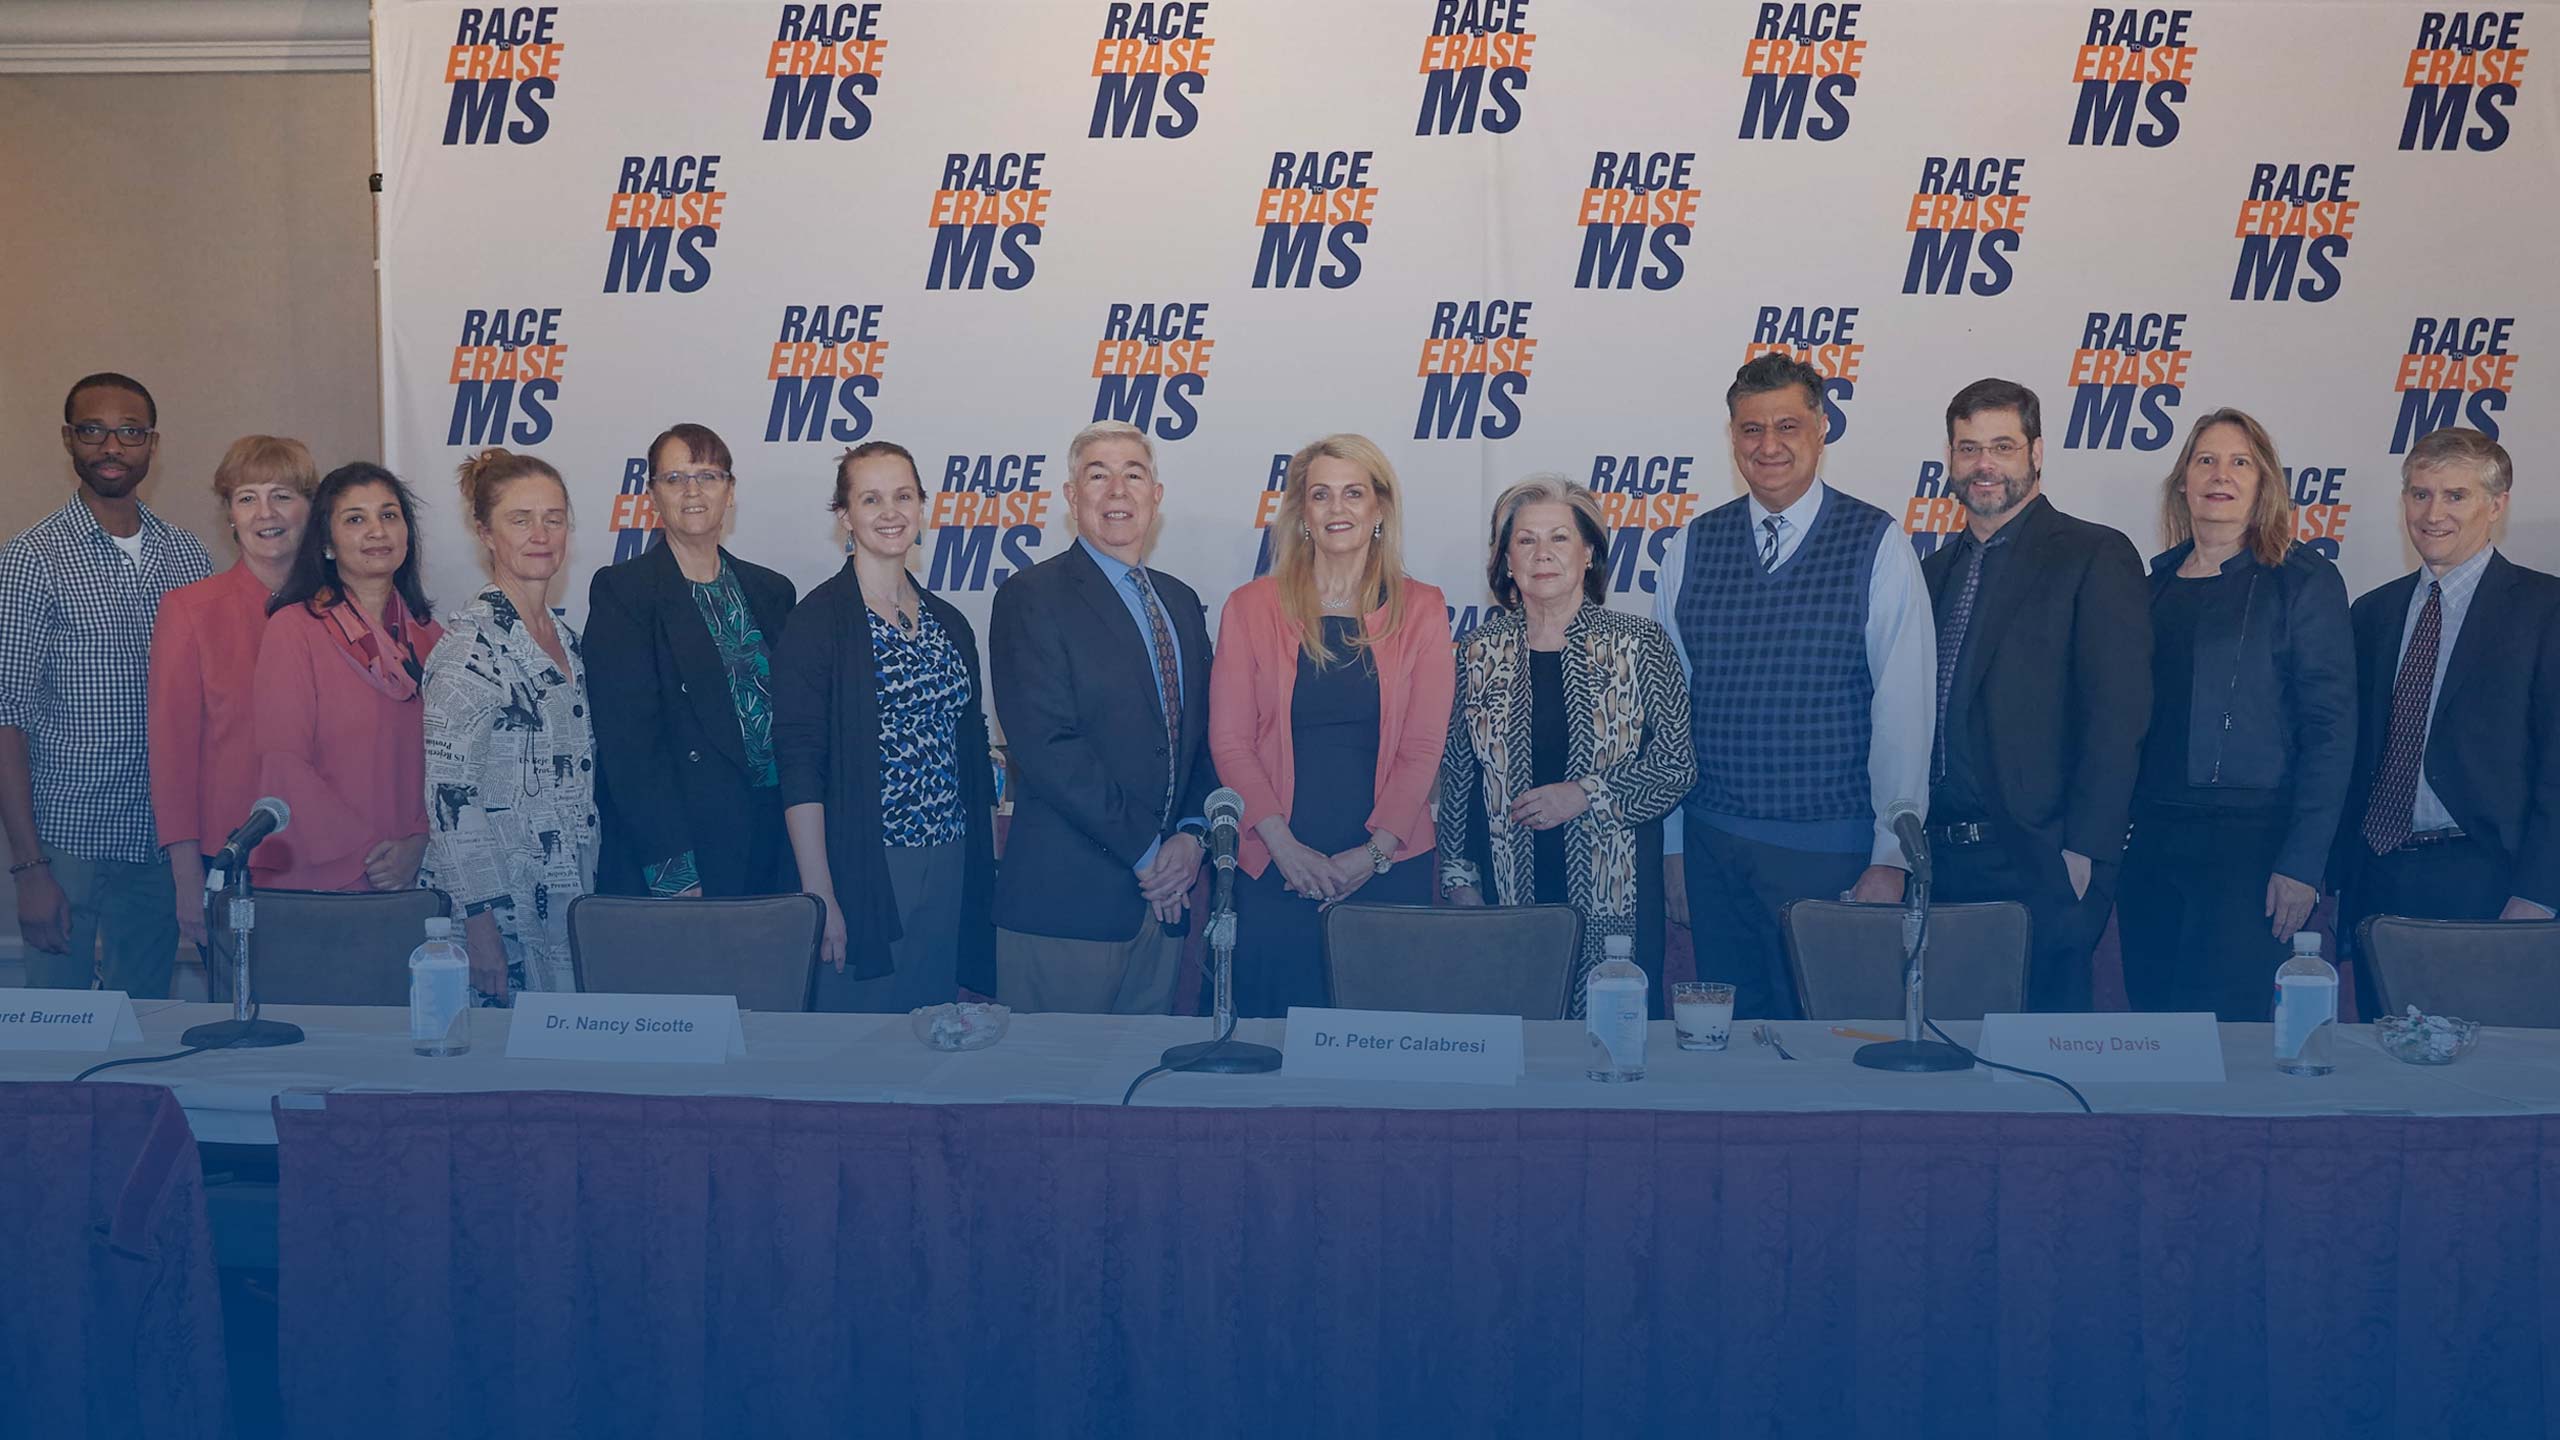 Race to Erase MS group photo